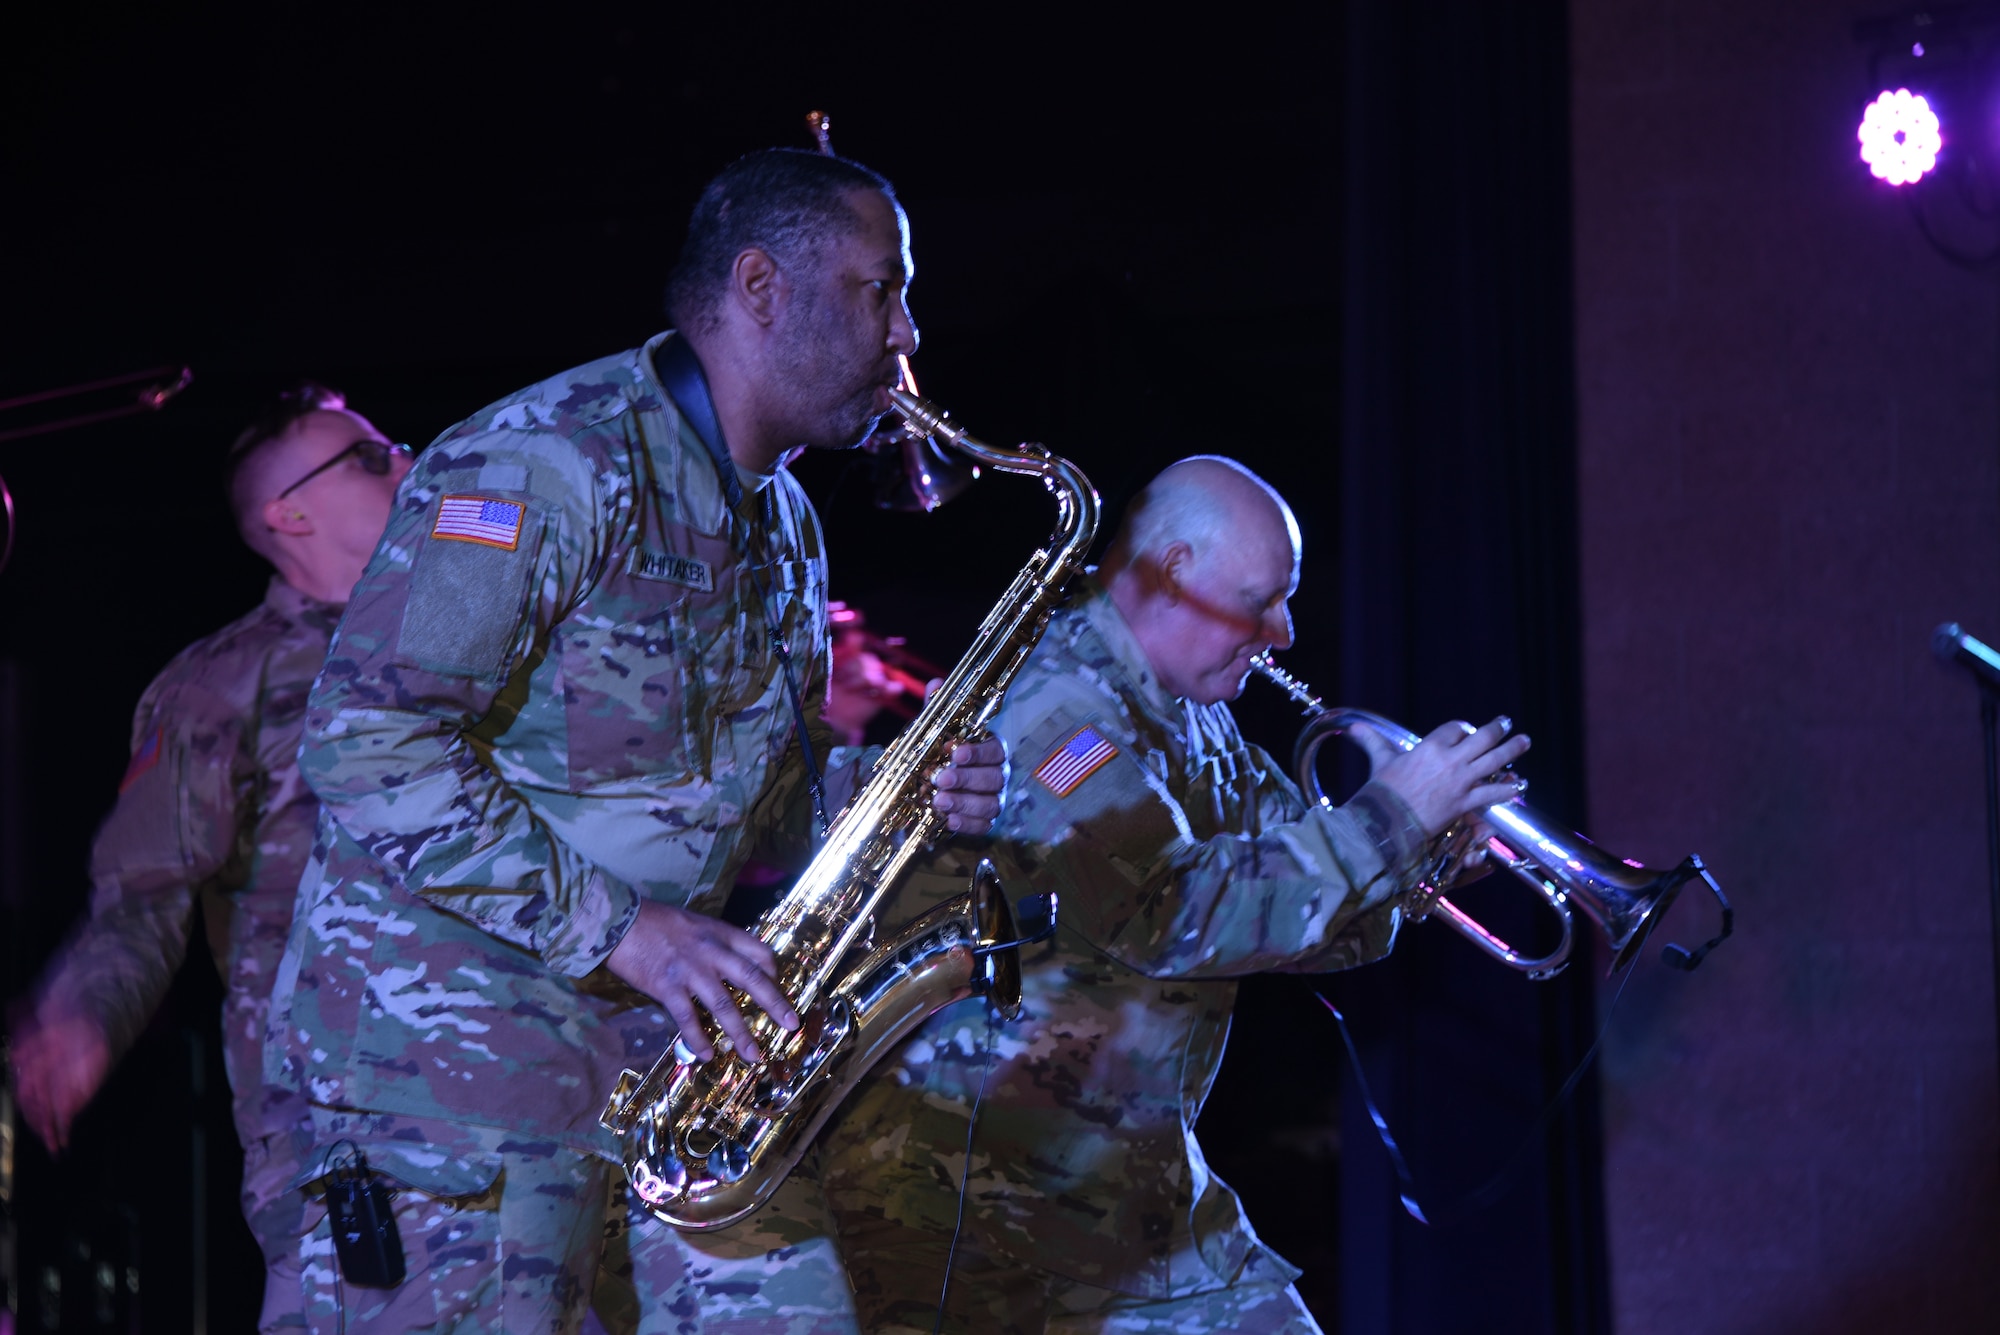 Iowa National Guard’s “Scrap Metal” music group performs in Western Iowa as part of their annual training.